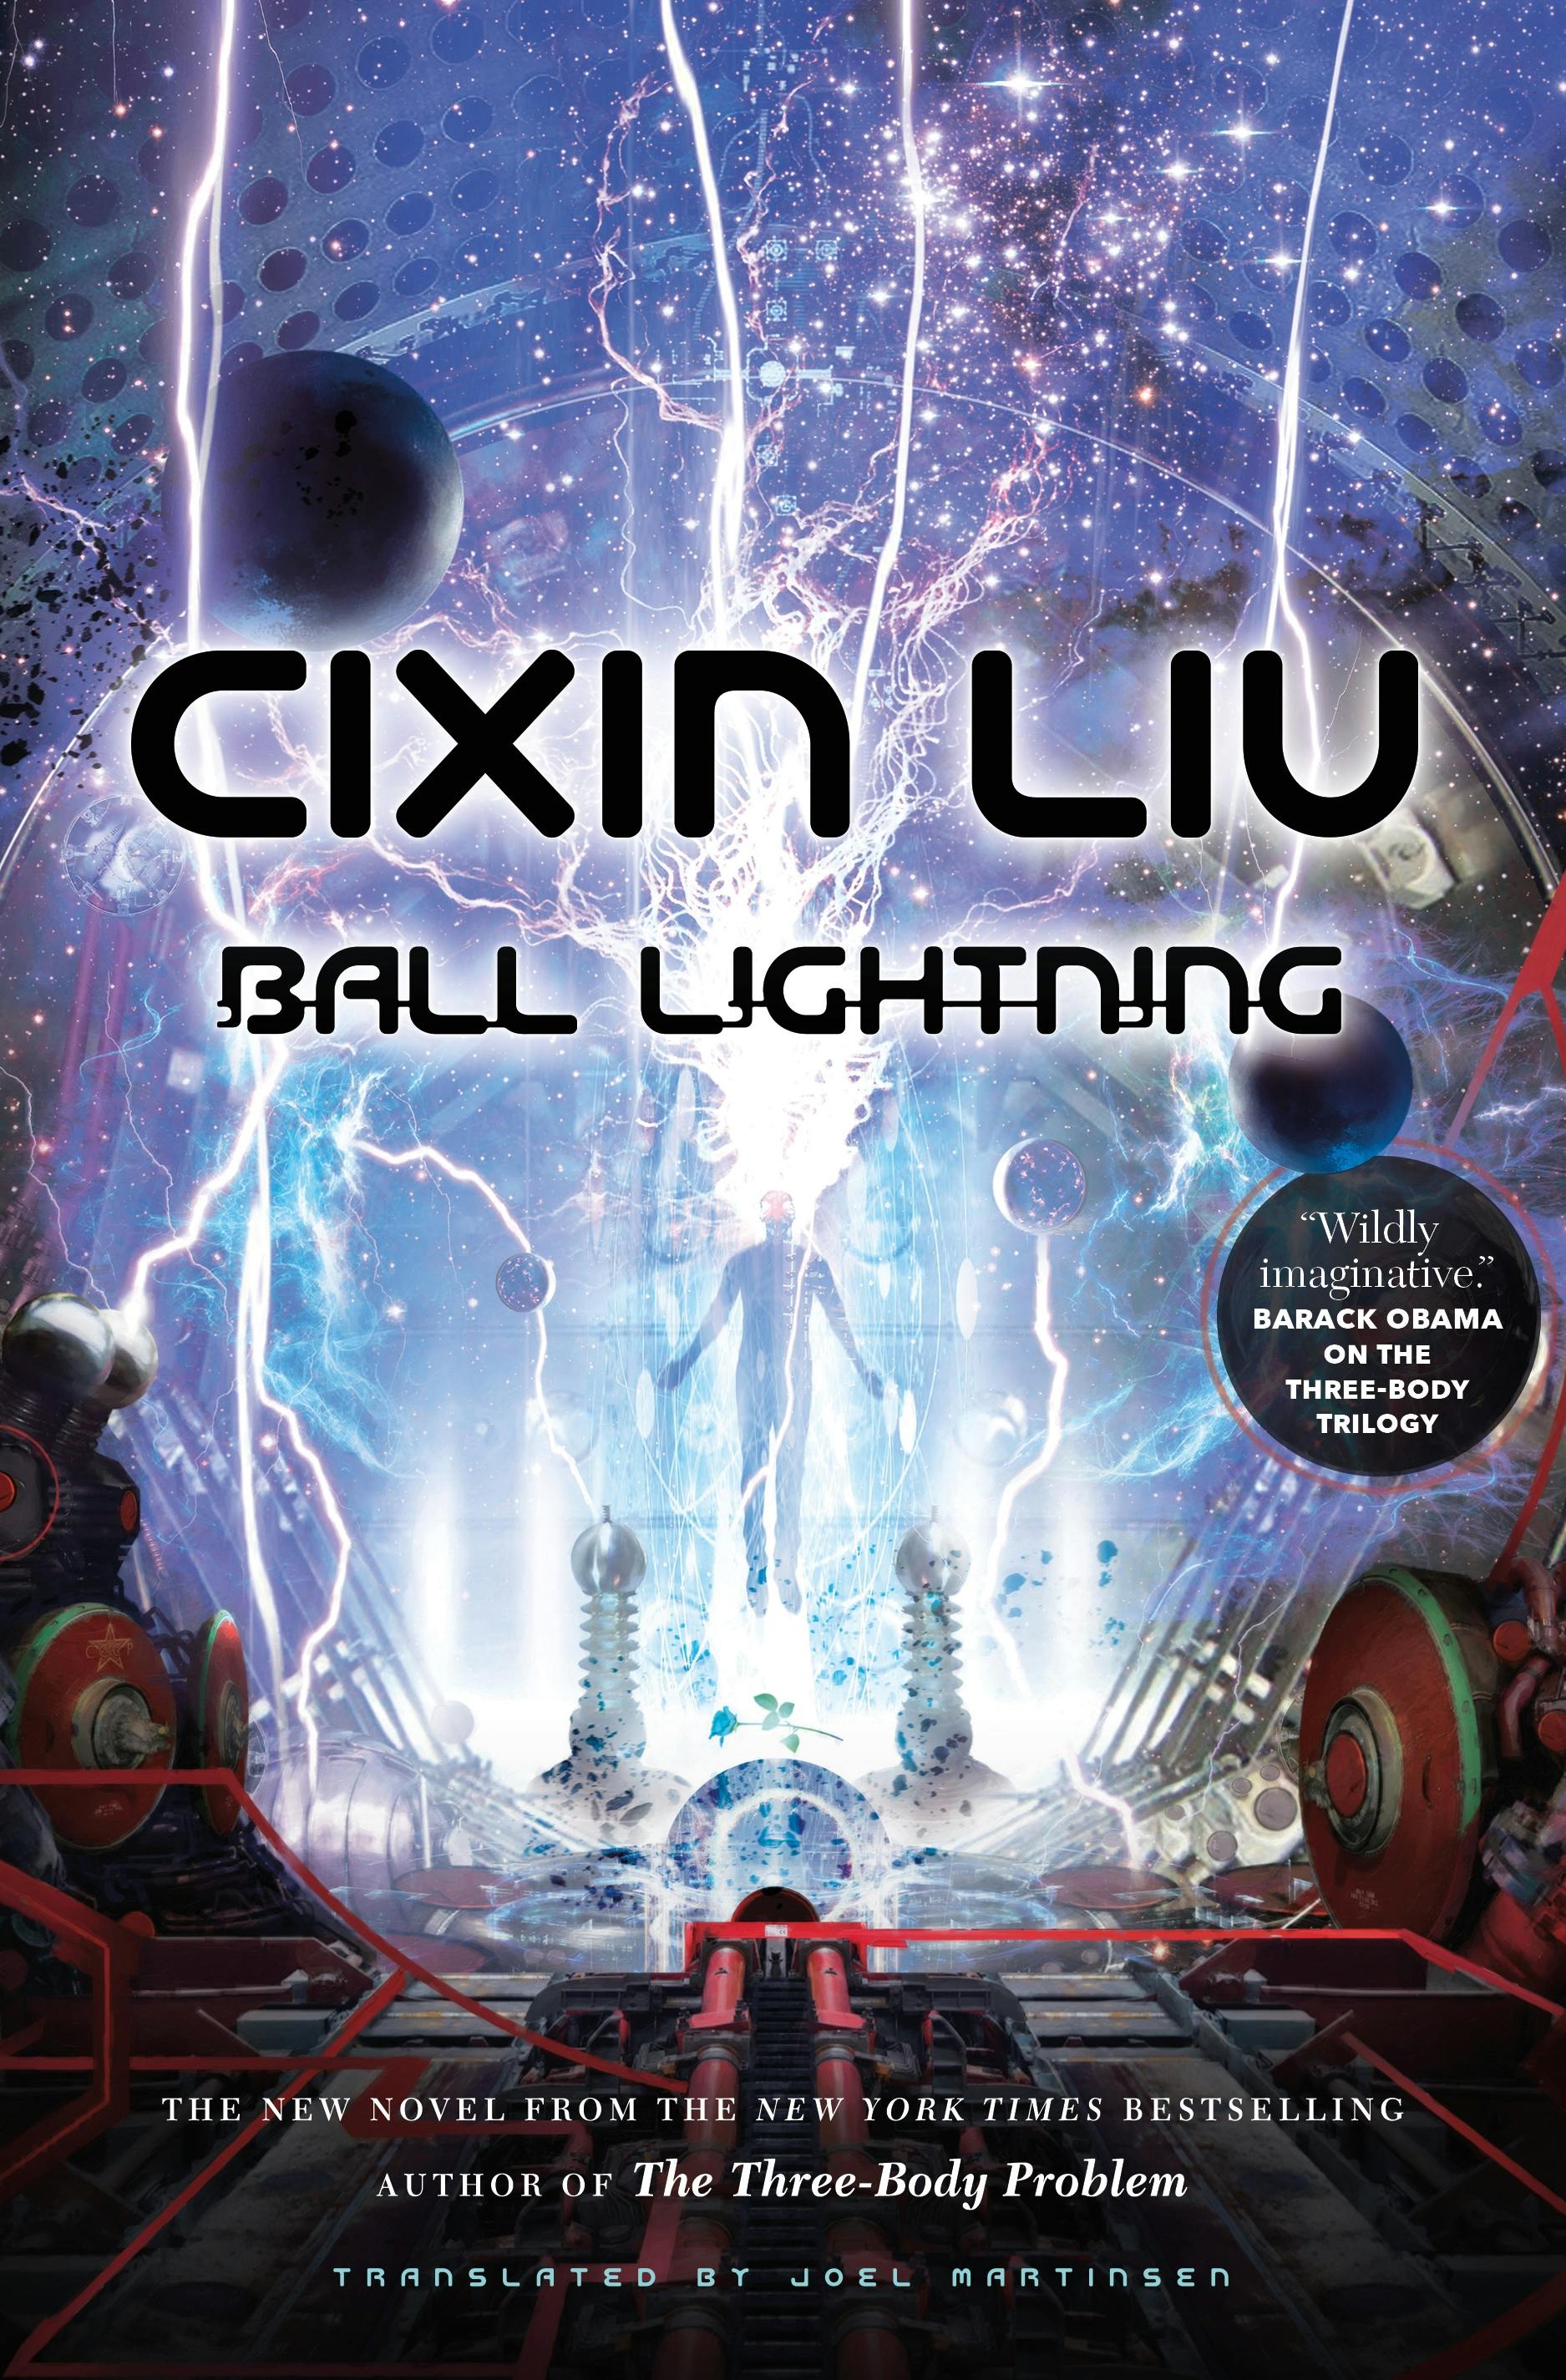 Cover for the book titled as: Ball Lightning